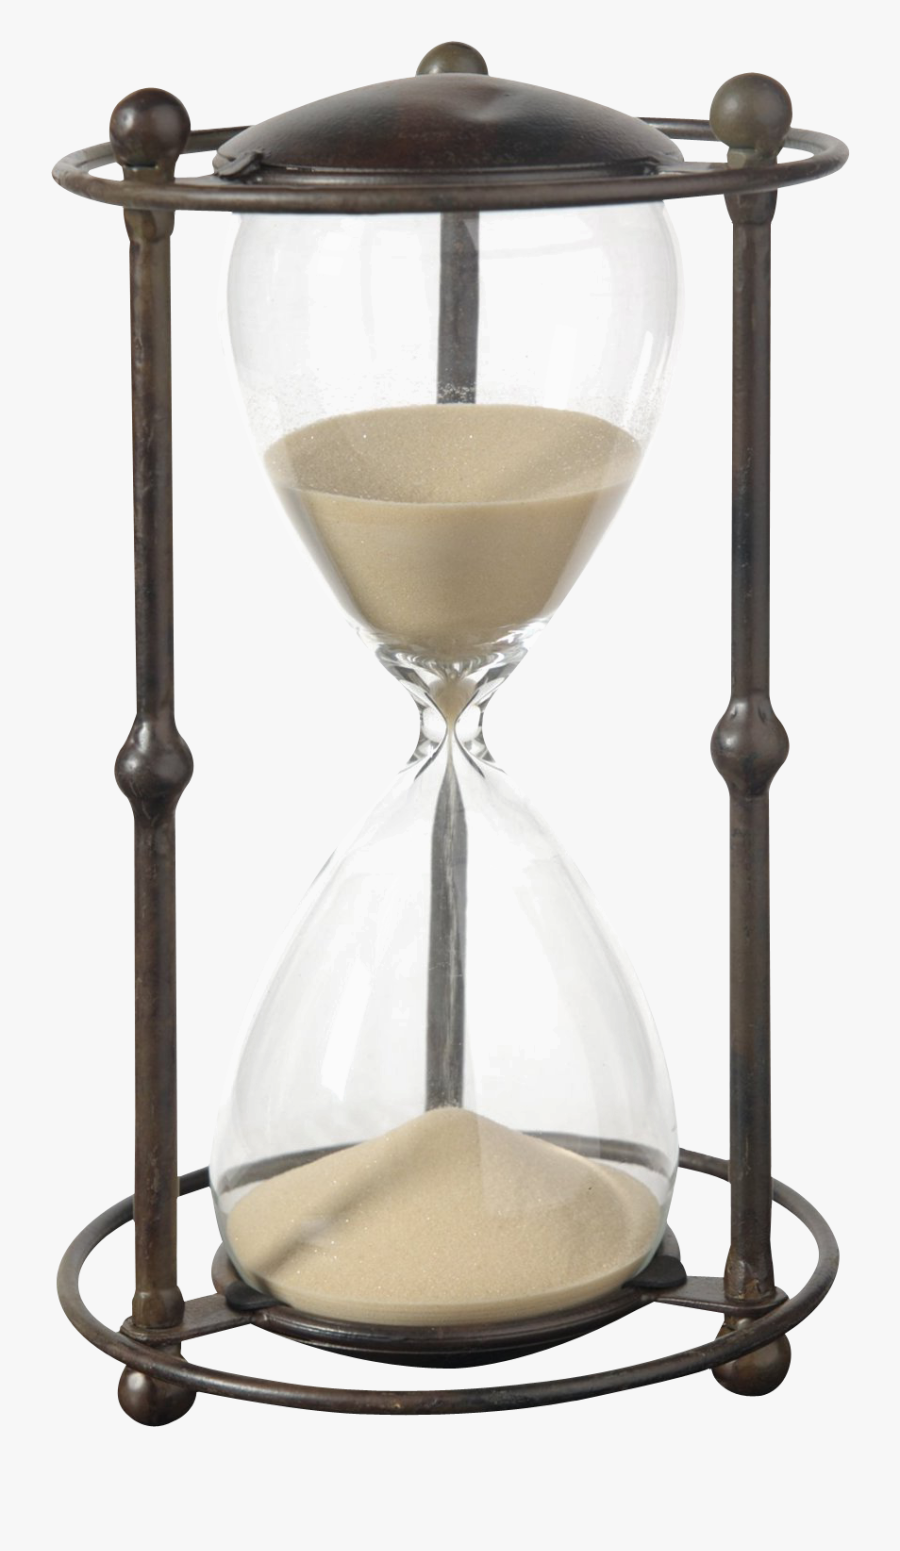 Hourglass Png Image - Hourglass Png, Transparent Clipart